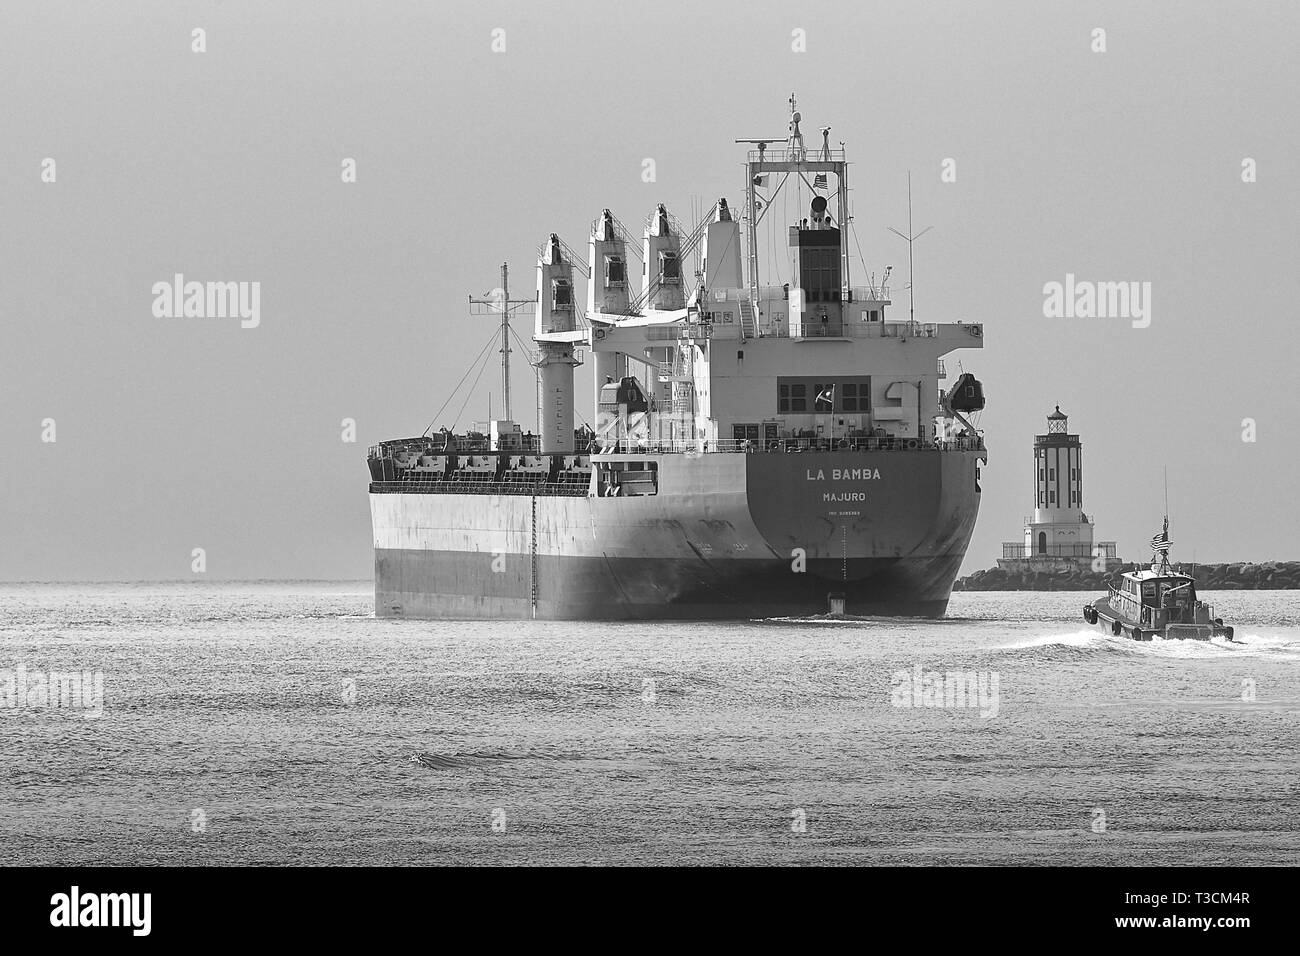 A Pilot Boat Follows The Bulk Carrier, LA BAMBA Leaving The Port Of Los Angeles, California, USA. The Los Angeles Harbor Light To The Right. Stock Photo